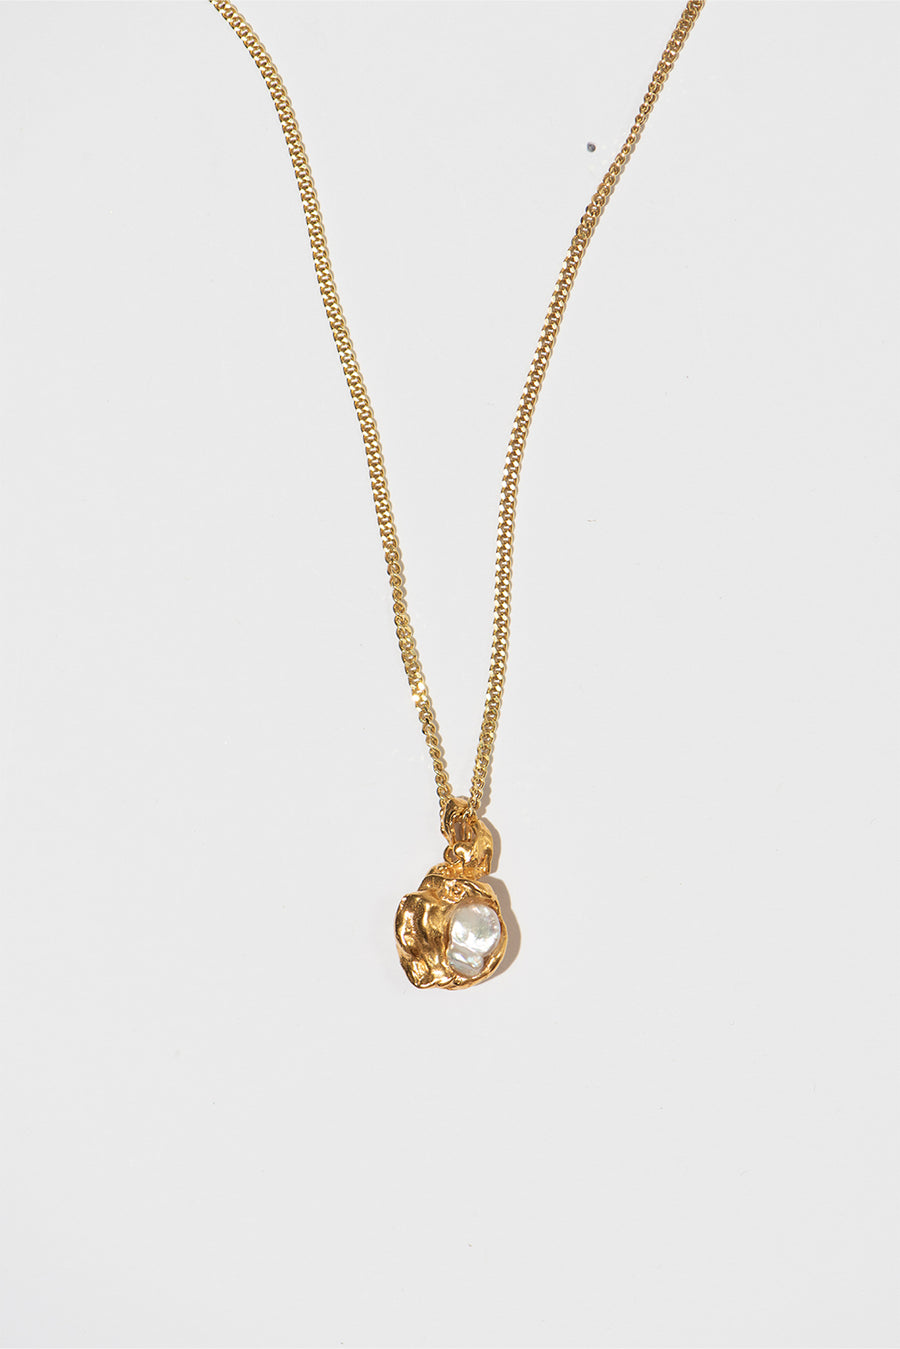 The Pearl Cocoon Pendant